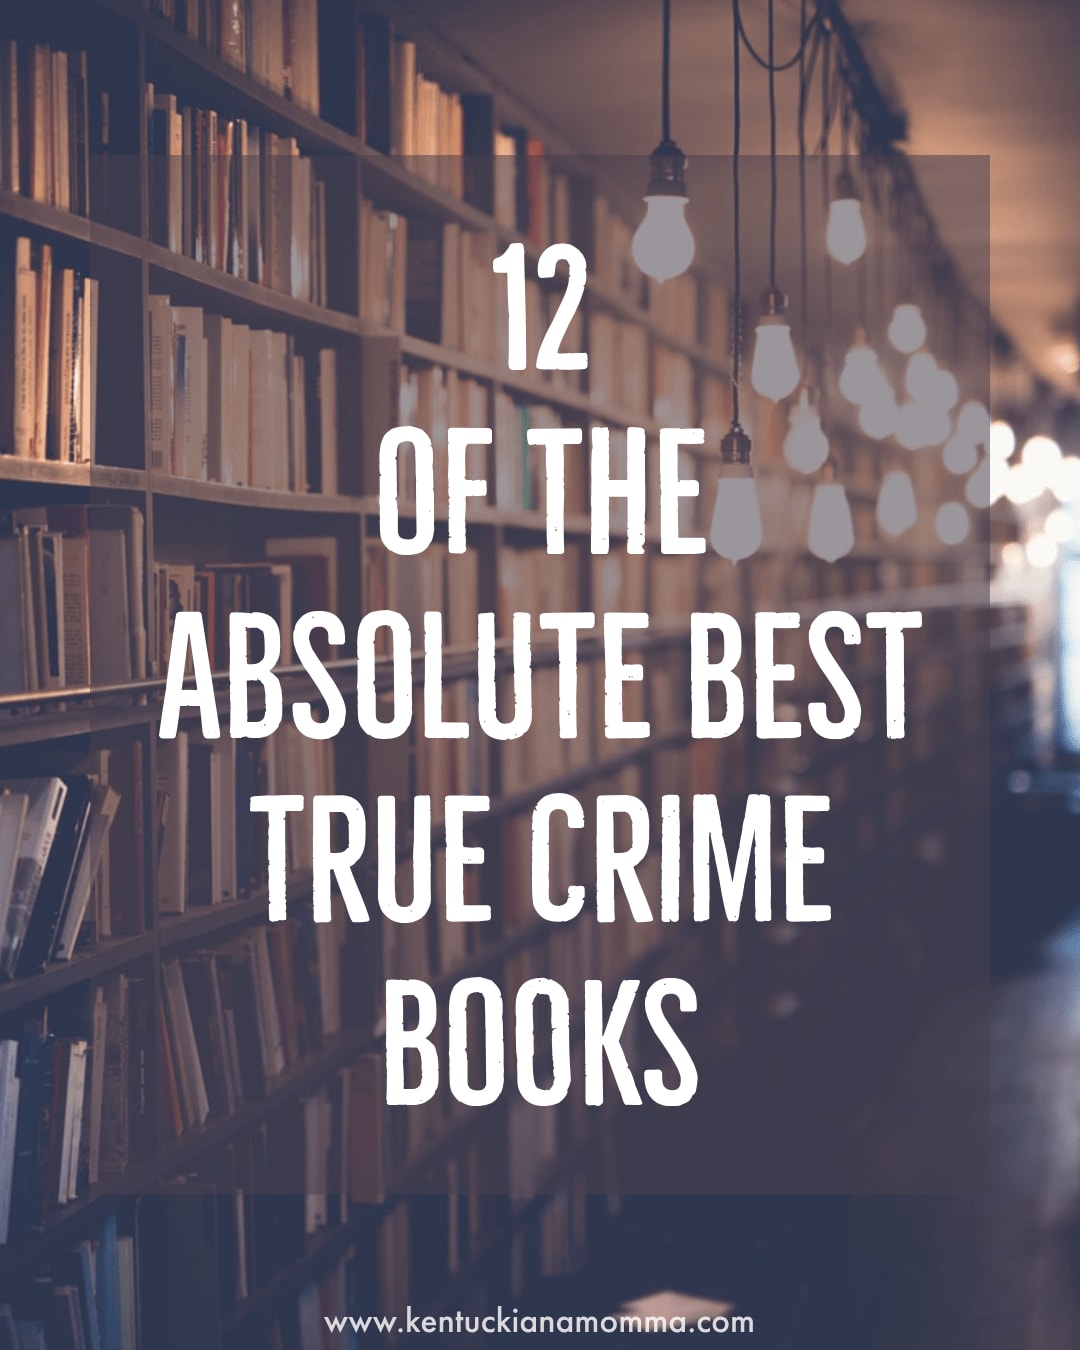 12 of the Absolute Best True Crime Books